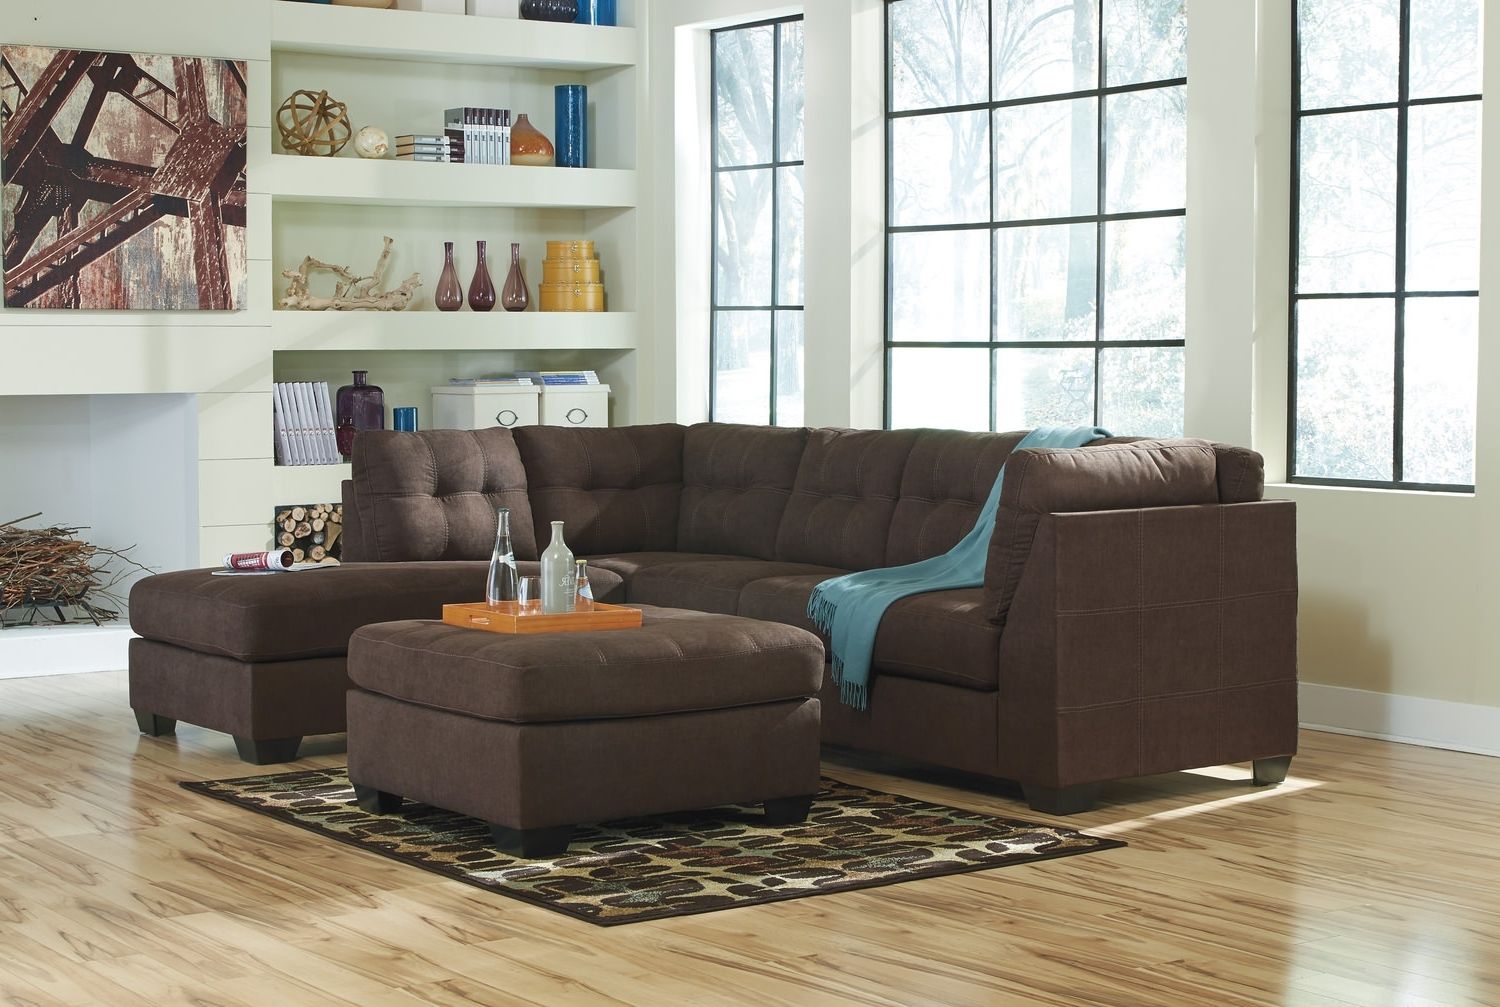 El Paso Tx Sectional Sofas Within Most Recent Crosby 2 Piece Modular Sectional At Hom Furniture (View 14 of 20)